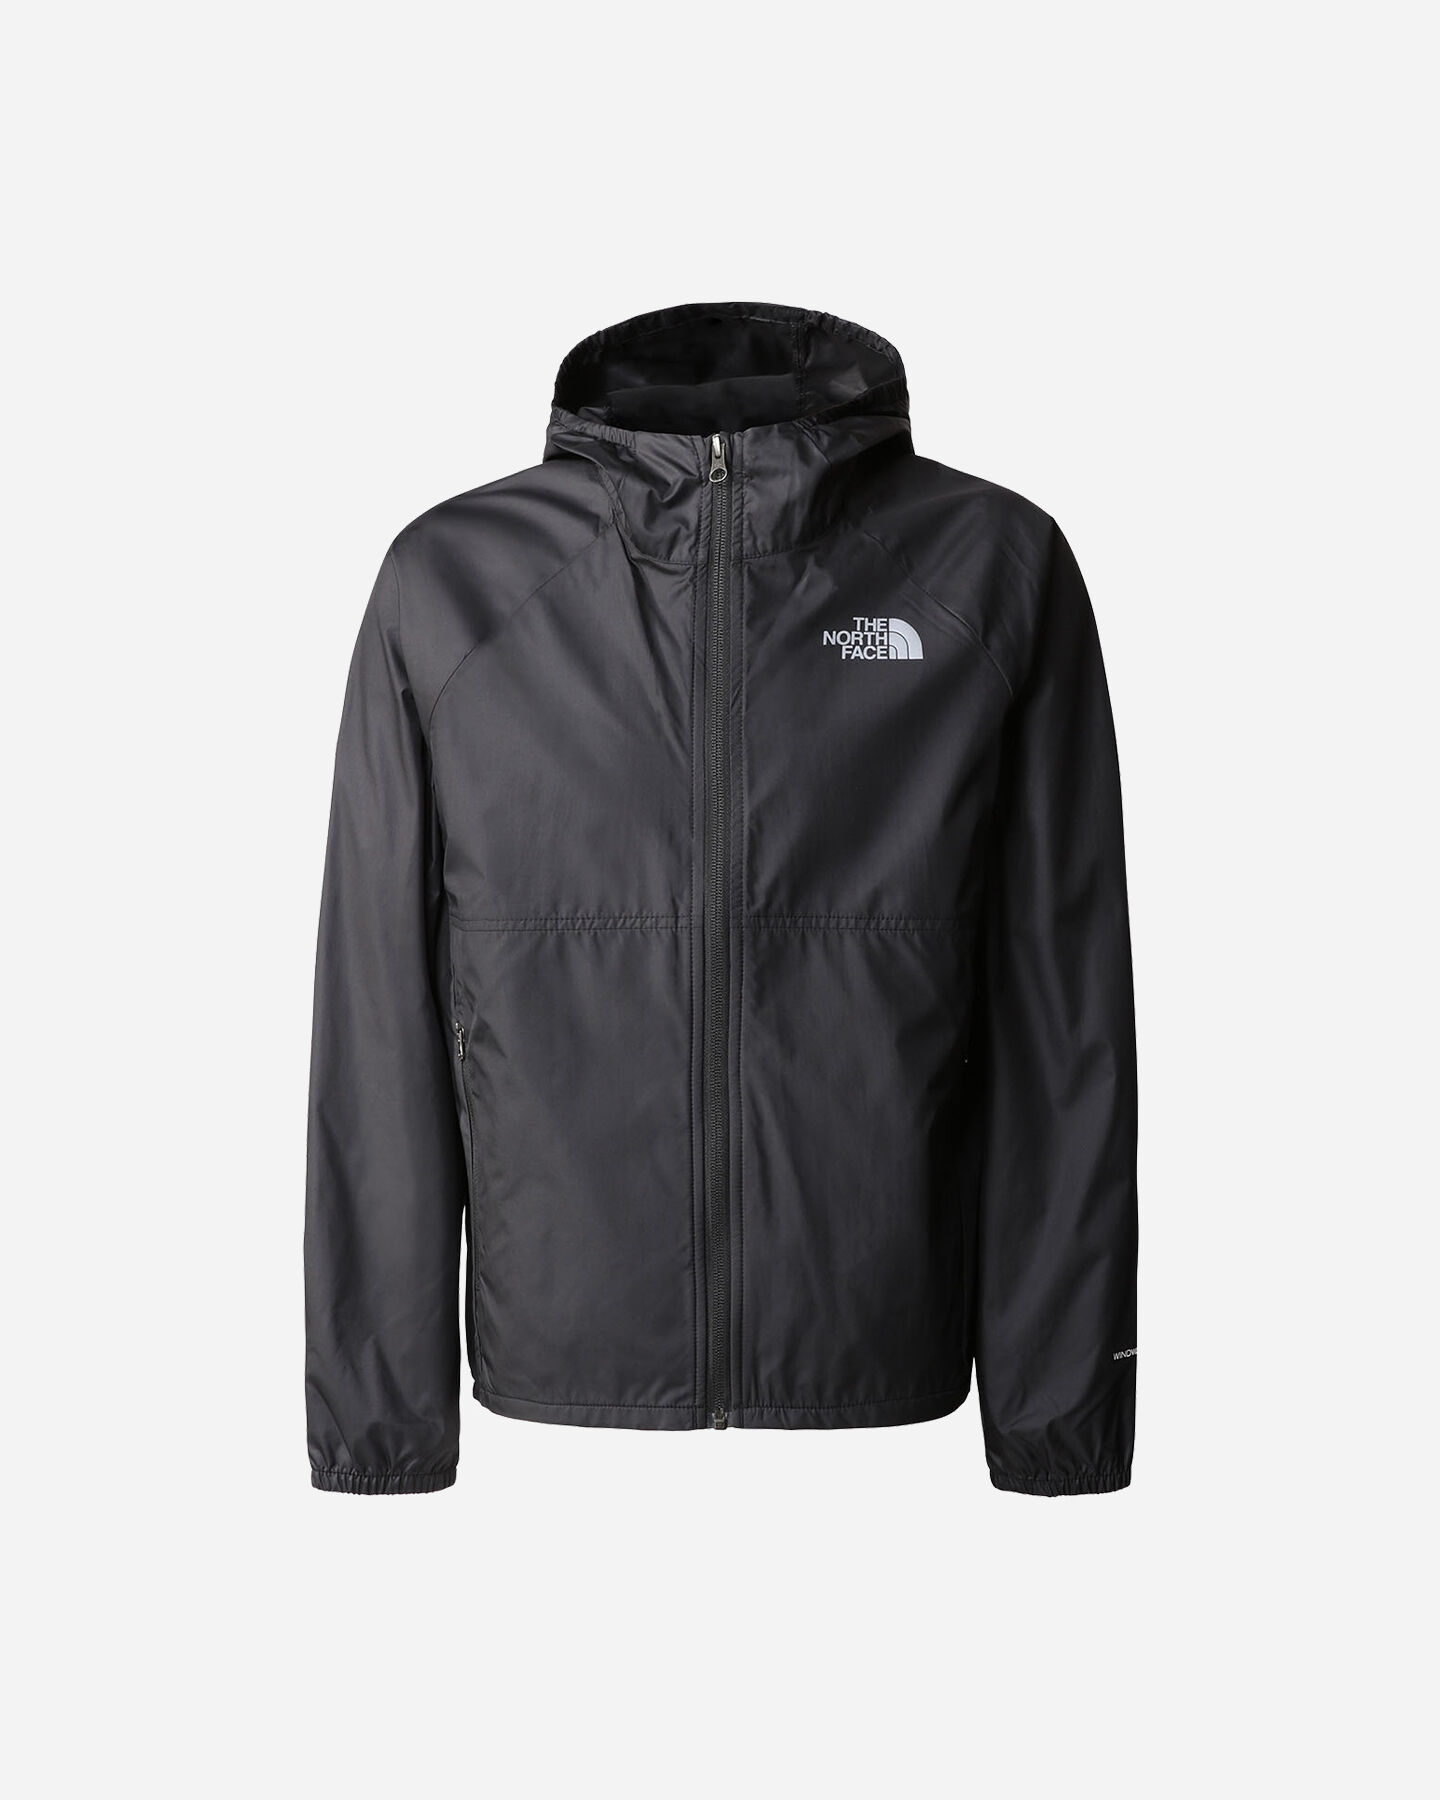  Giubbotto THE NORTH FACE NEVER STOP JR S5537294 scatto 0